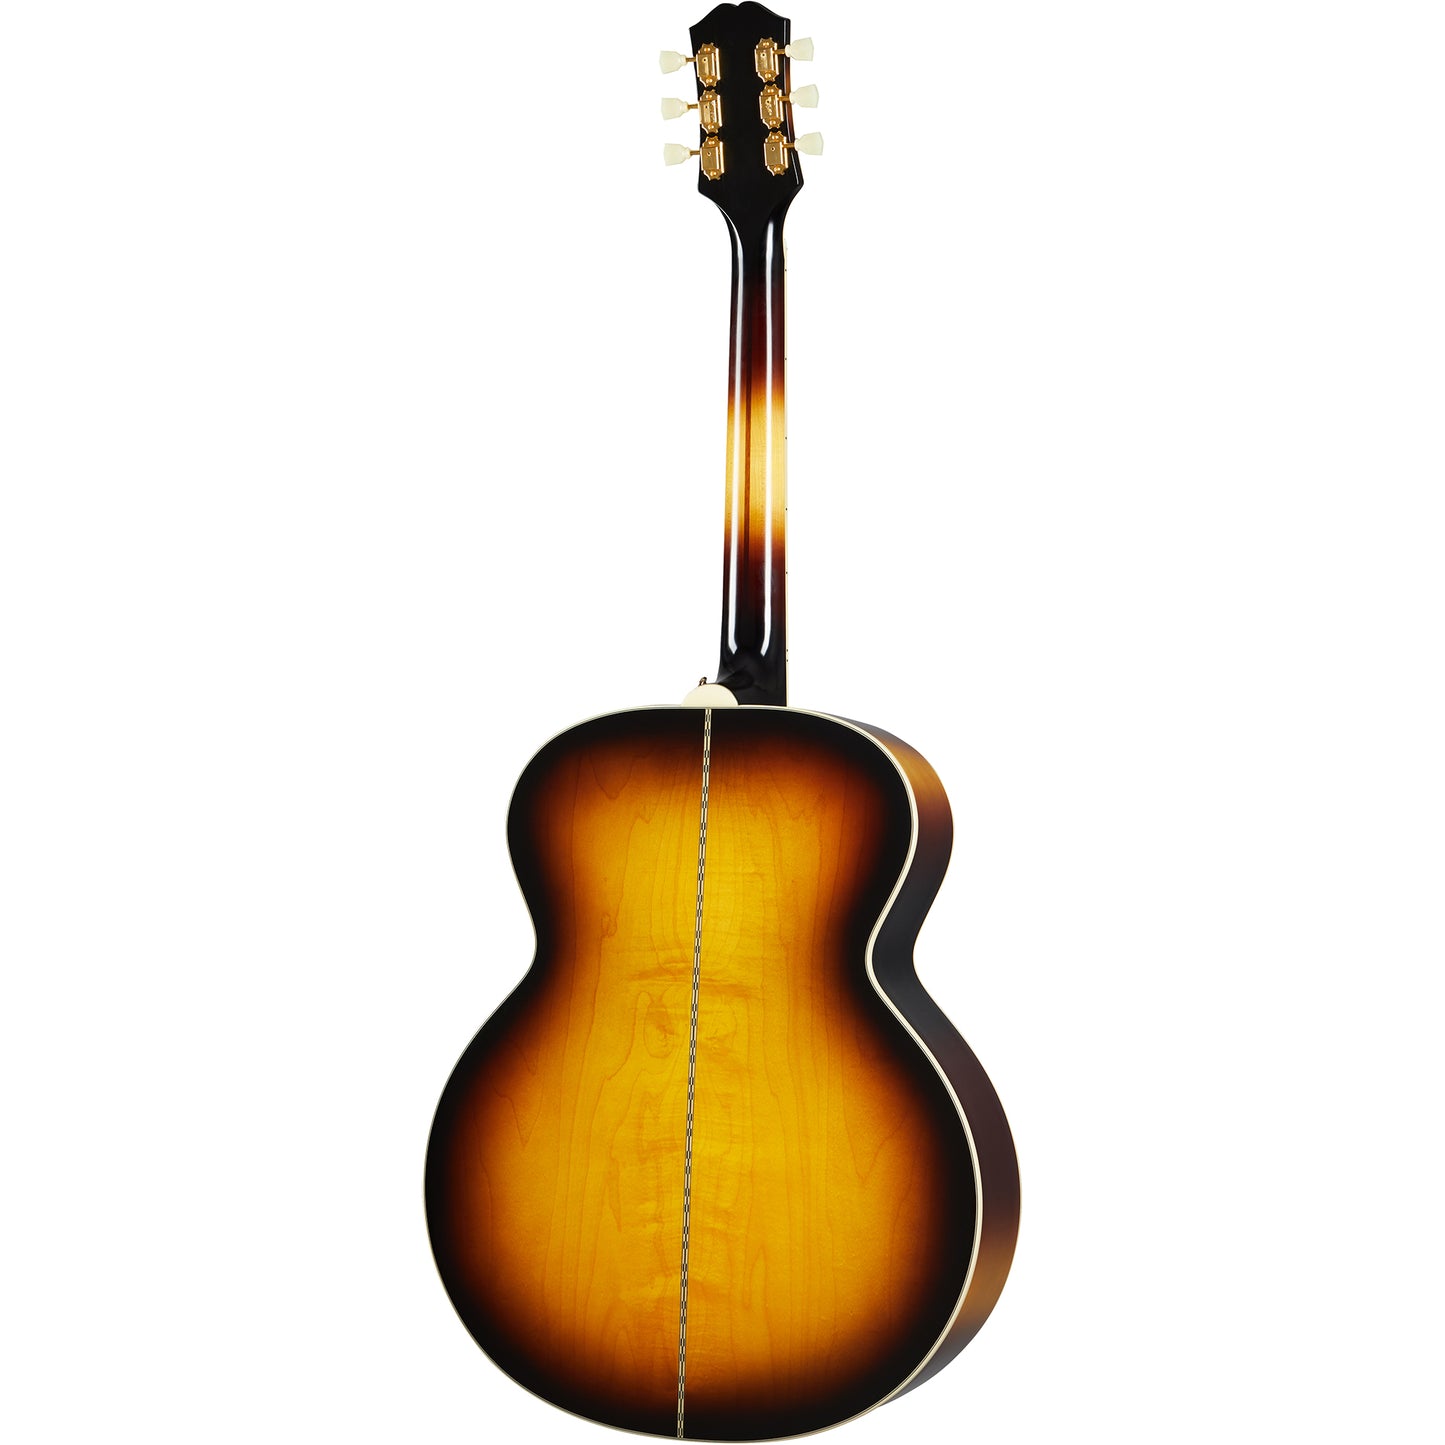 Epiphone Inspired By Gibson J-200 Acoustic Guitar, Aged Vintage Sunburst Gloss